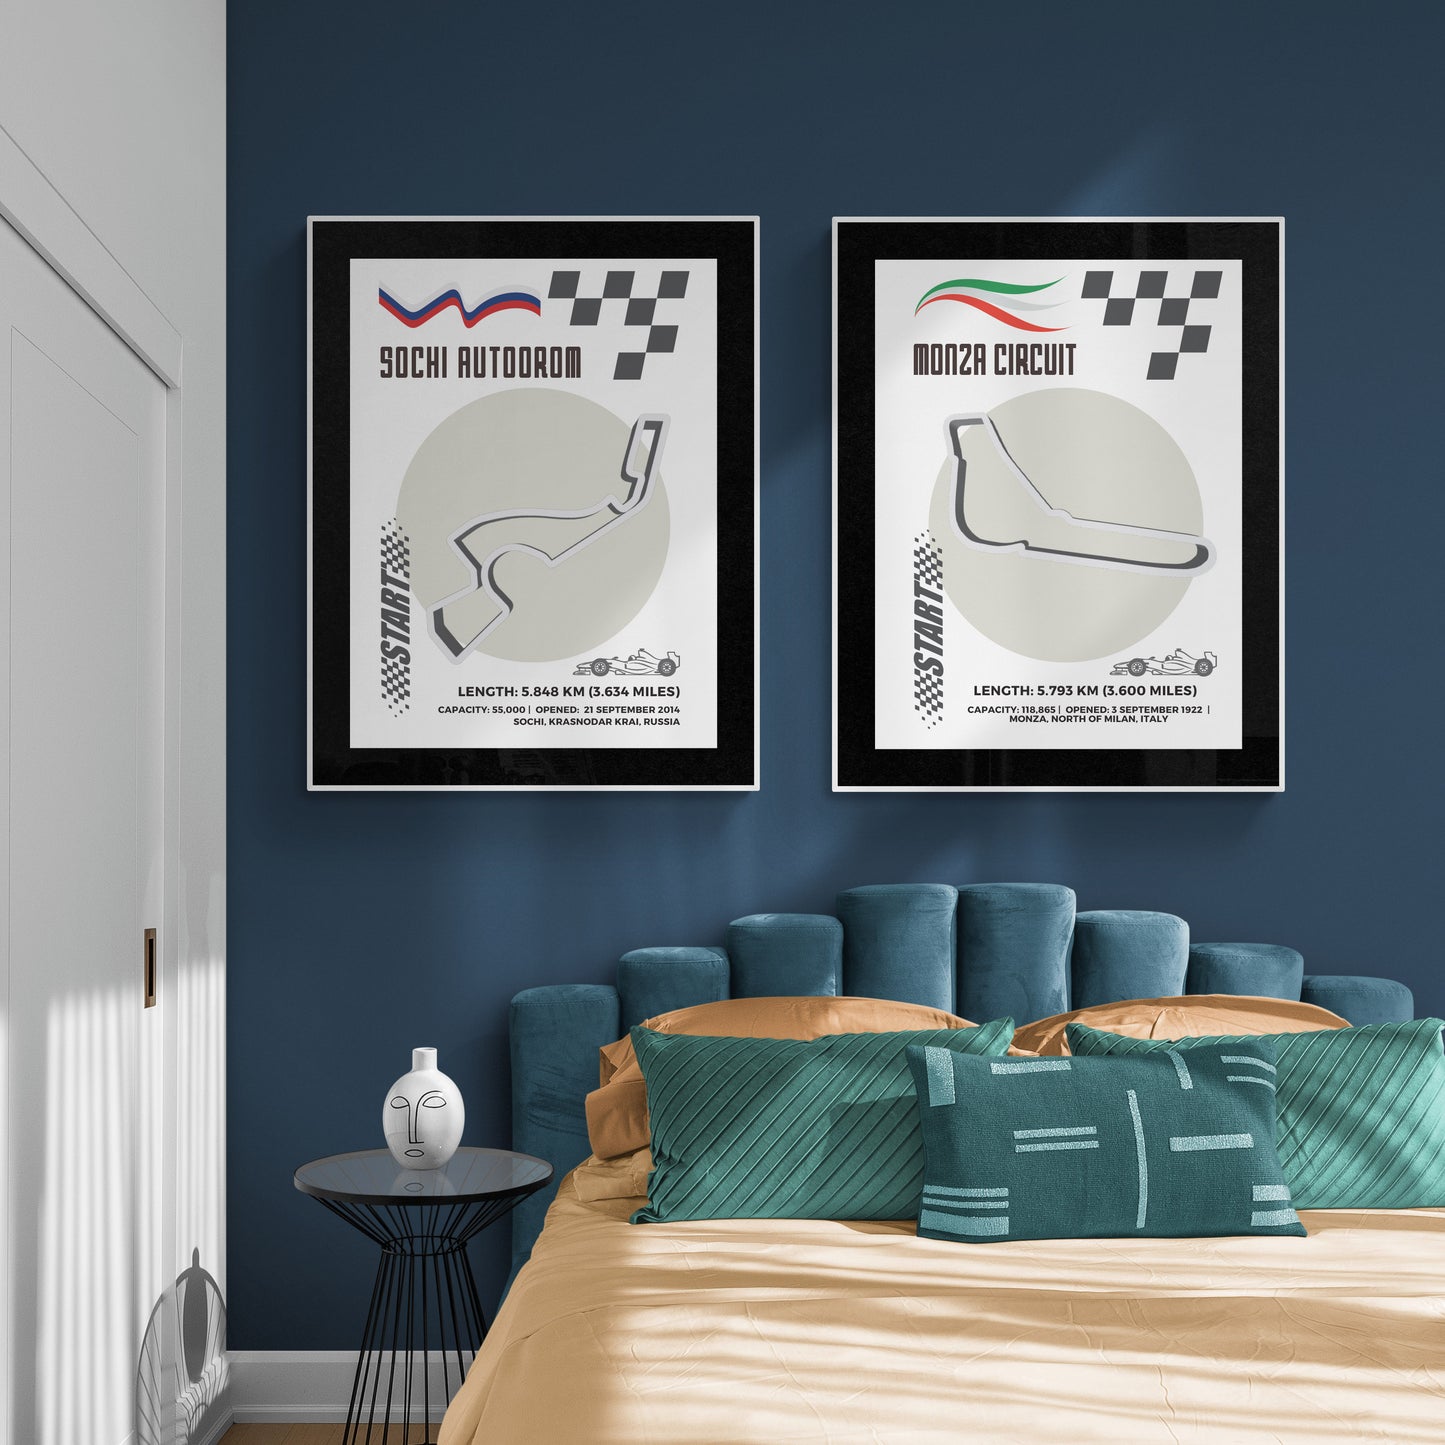 Immerse yourself in the world of Formula One with our Hanoi Street Circuit F1 Posters. Made with premium, age-resistant paper, our posters feature detailed maps and information about the infamous racing tracks. Whether you're a fan of Monza, Monaco, or Spa-Francorchamps, these posters are a must-have for any Formula One enthusiast.